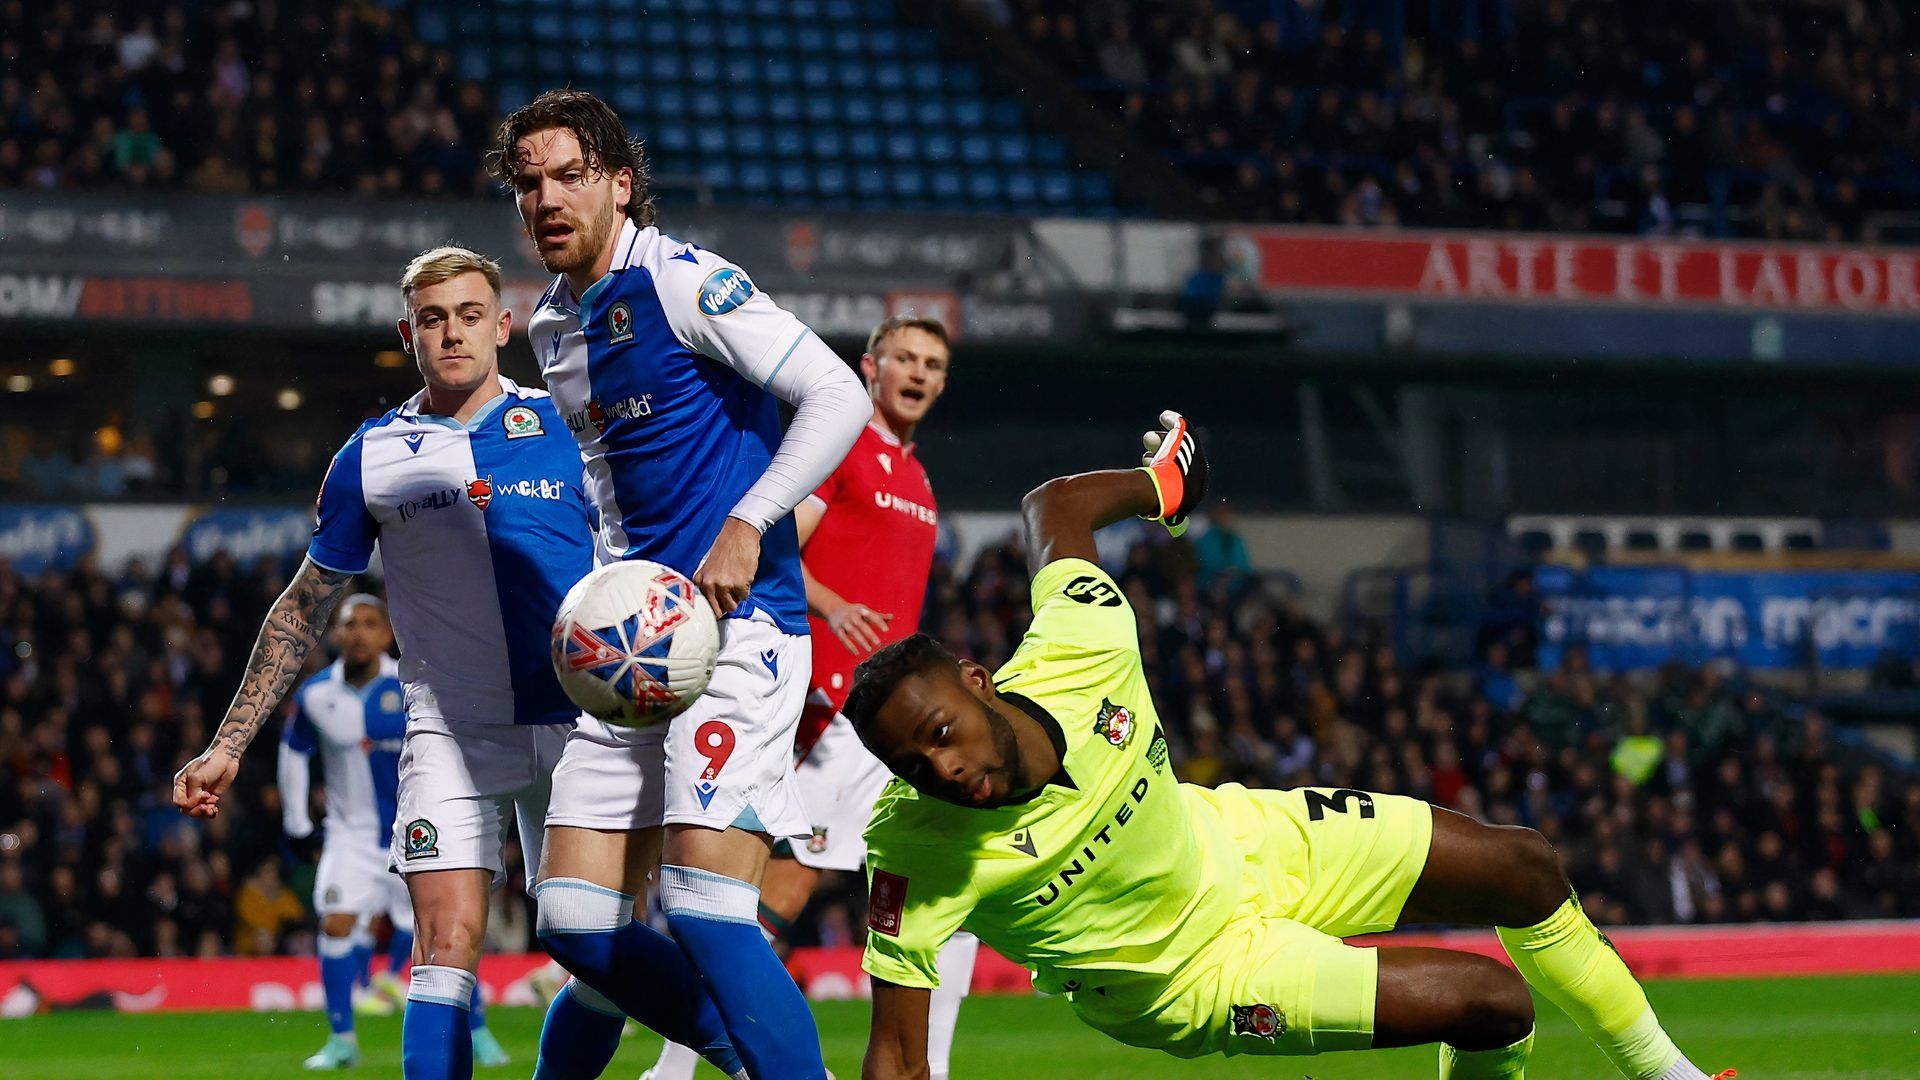 Blackburn Rovers capitalise on Ipswich Town promotion in Sam Gallagher hunt